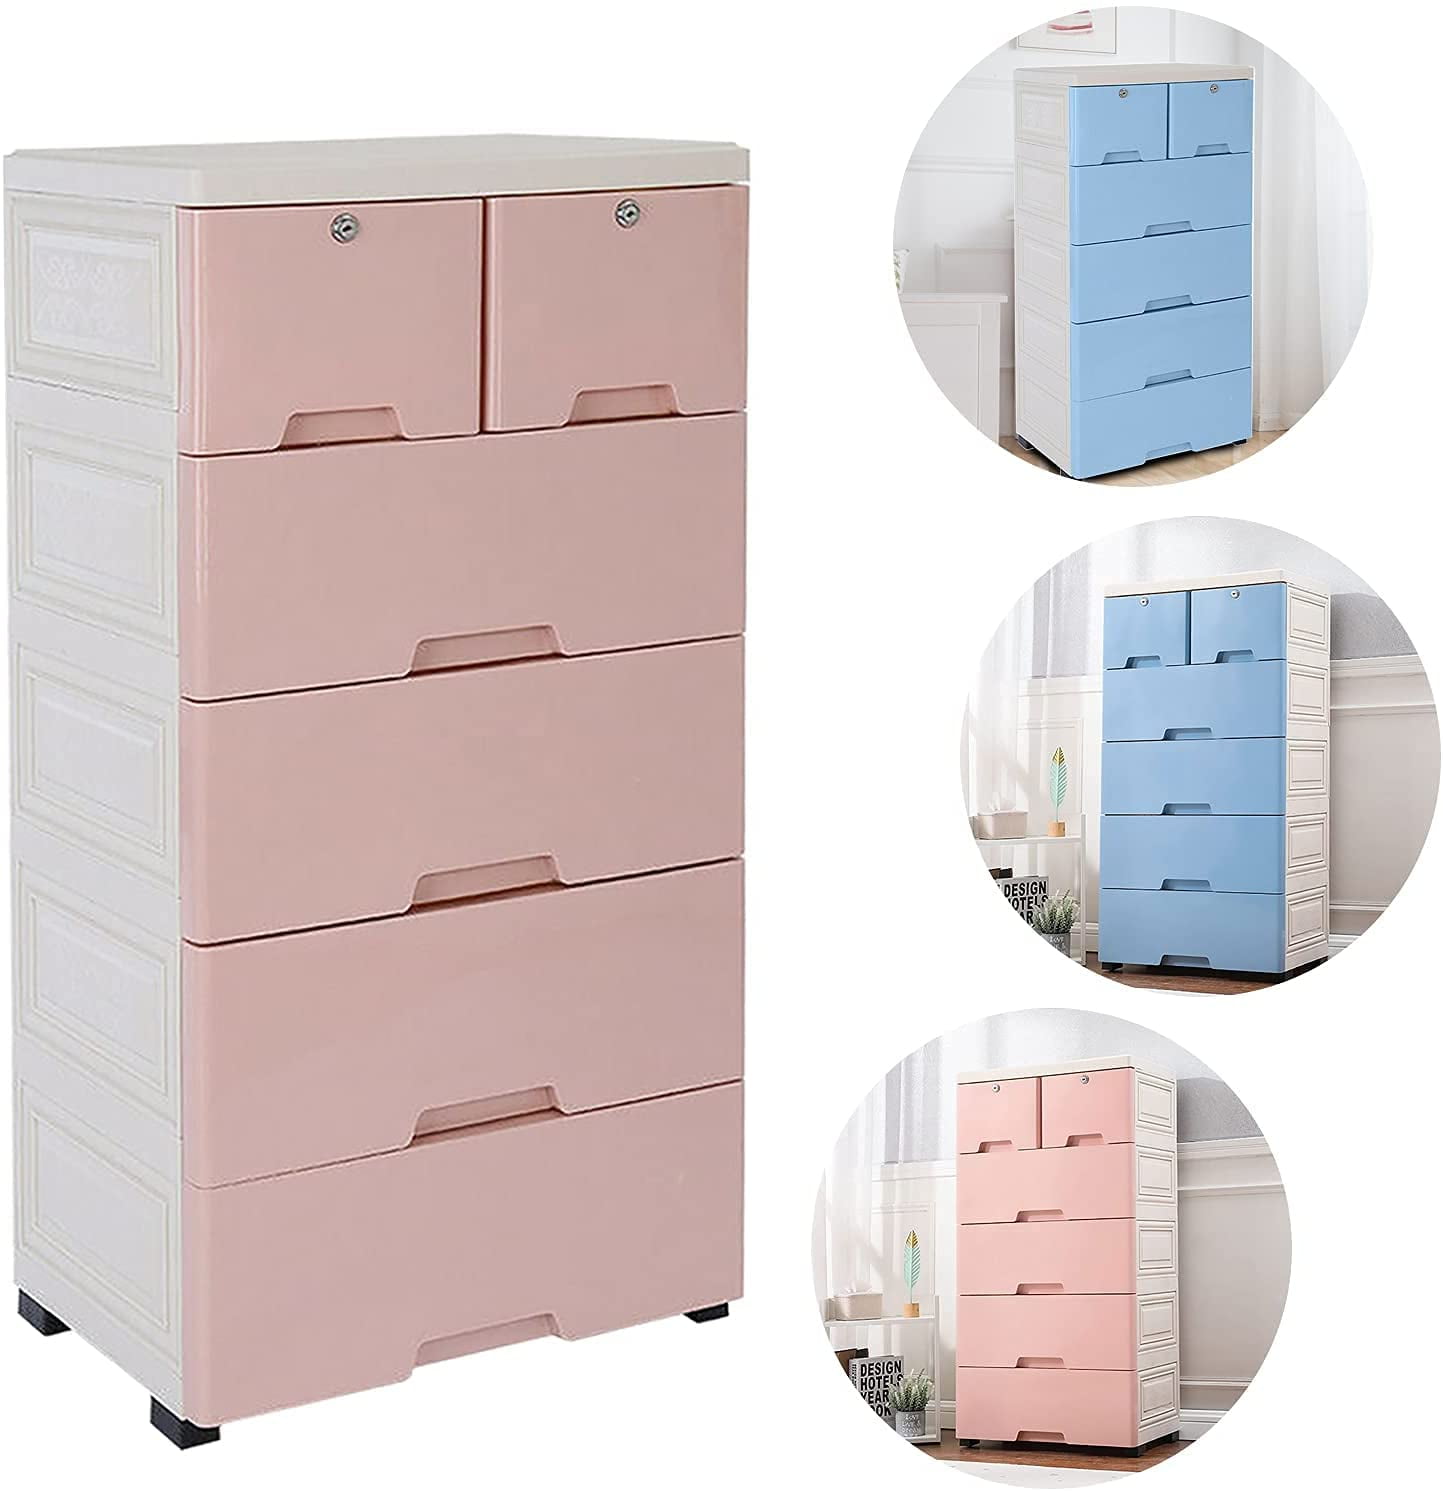 Plastic Storage Cabinets Drawers  Large Plastic Cabinet Drawers - Large  67cm - Aliexpress